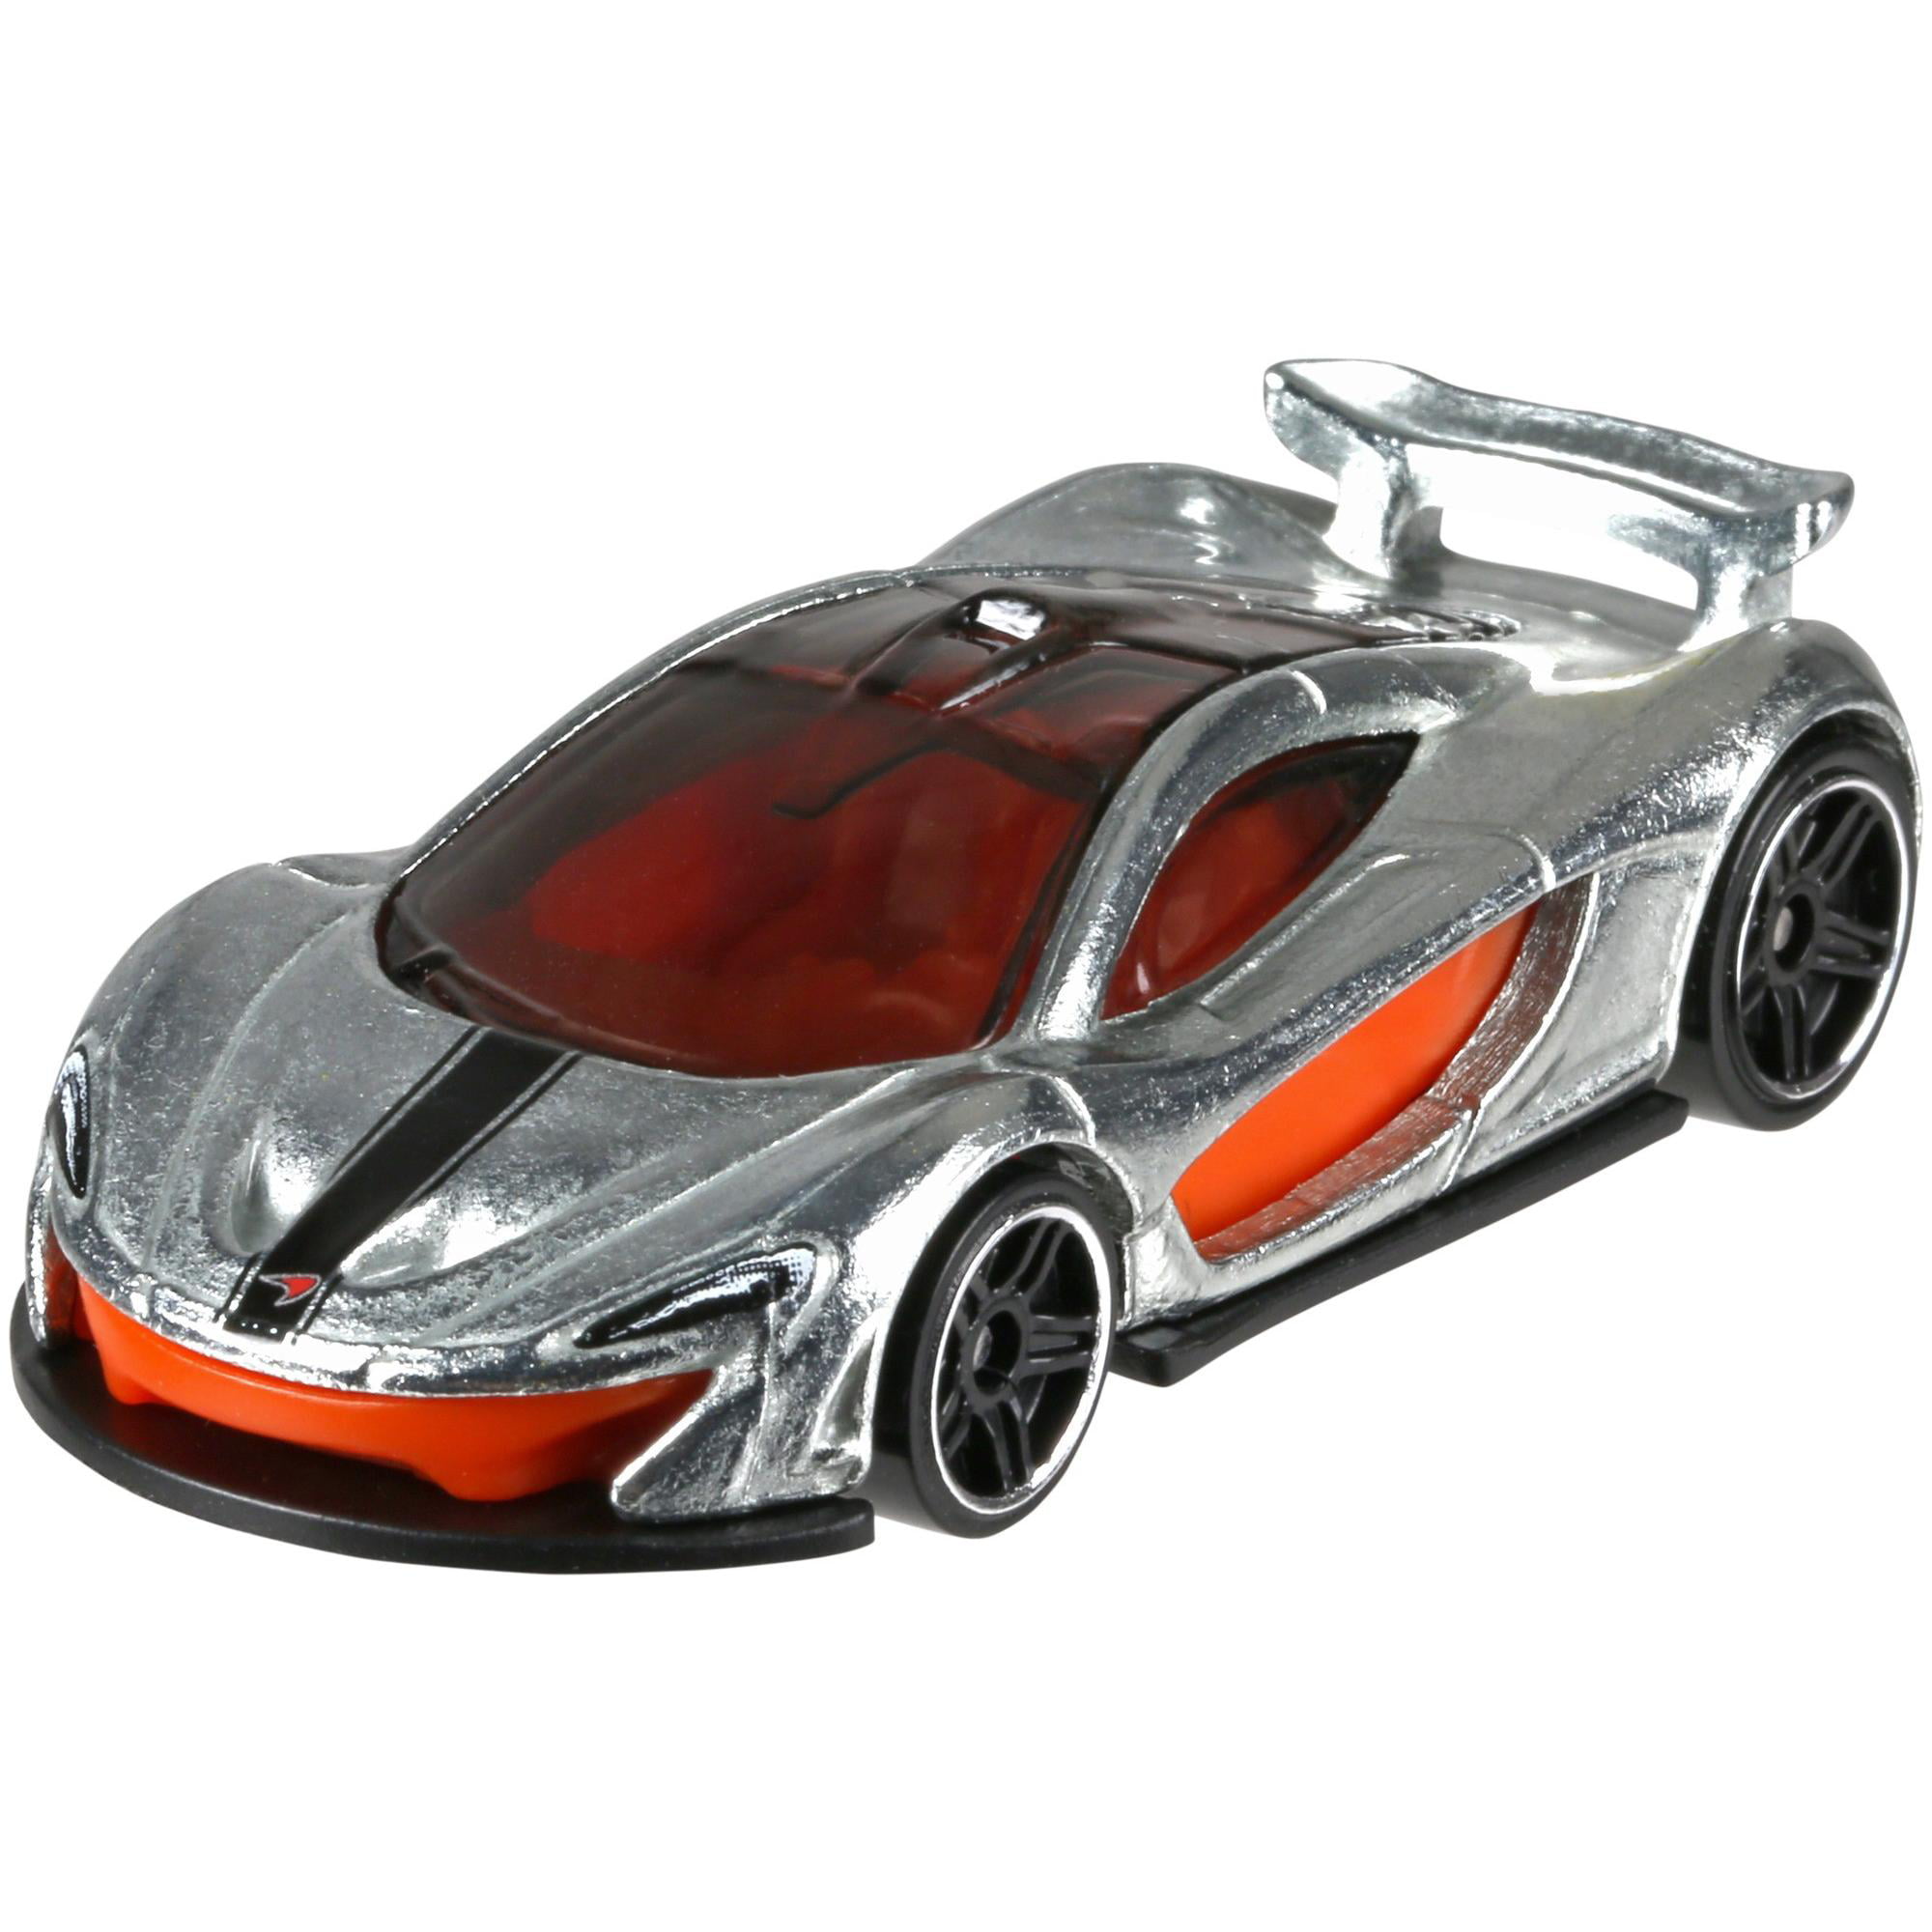 Can Hot Wheels McLaren Cars Race on an ID Track? – OsVehicle